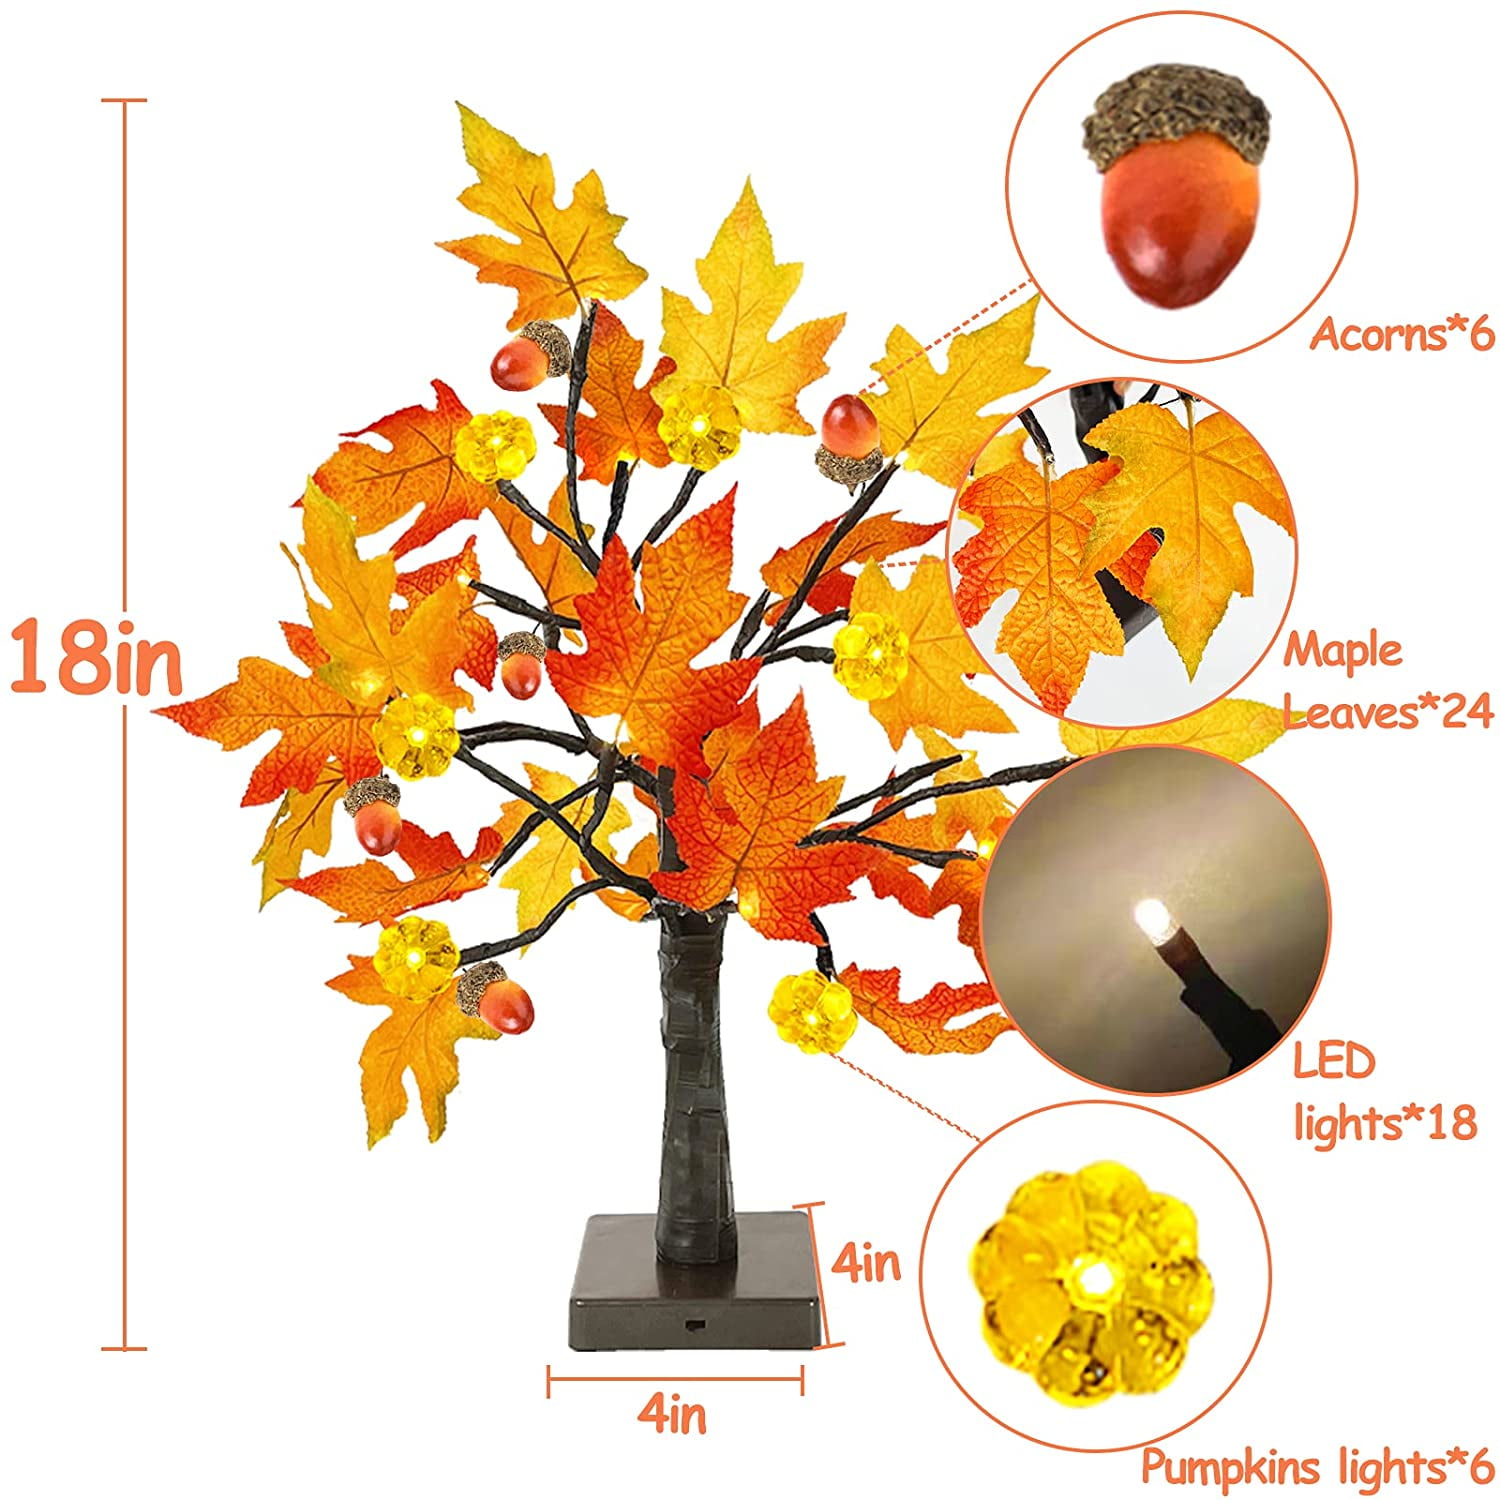 TURNMEON 18'' Fall Lighted Maple Tree with Timer 24 Pumpkin Lights Battery Operated Lighted Artificial Maple Leaf Tree for Fall Decor Thanksgiving Autumn Harvest Home Tabletop Indoor Decorations